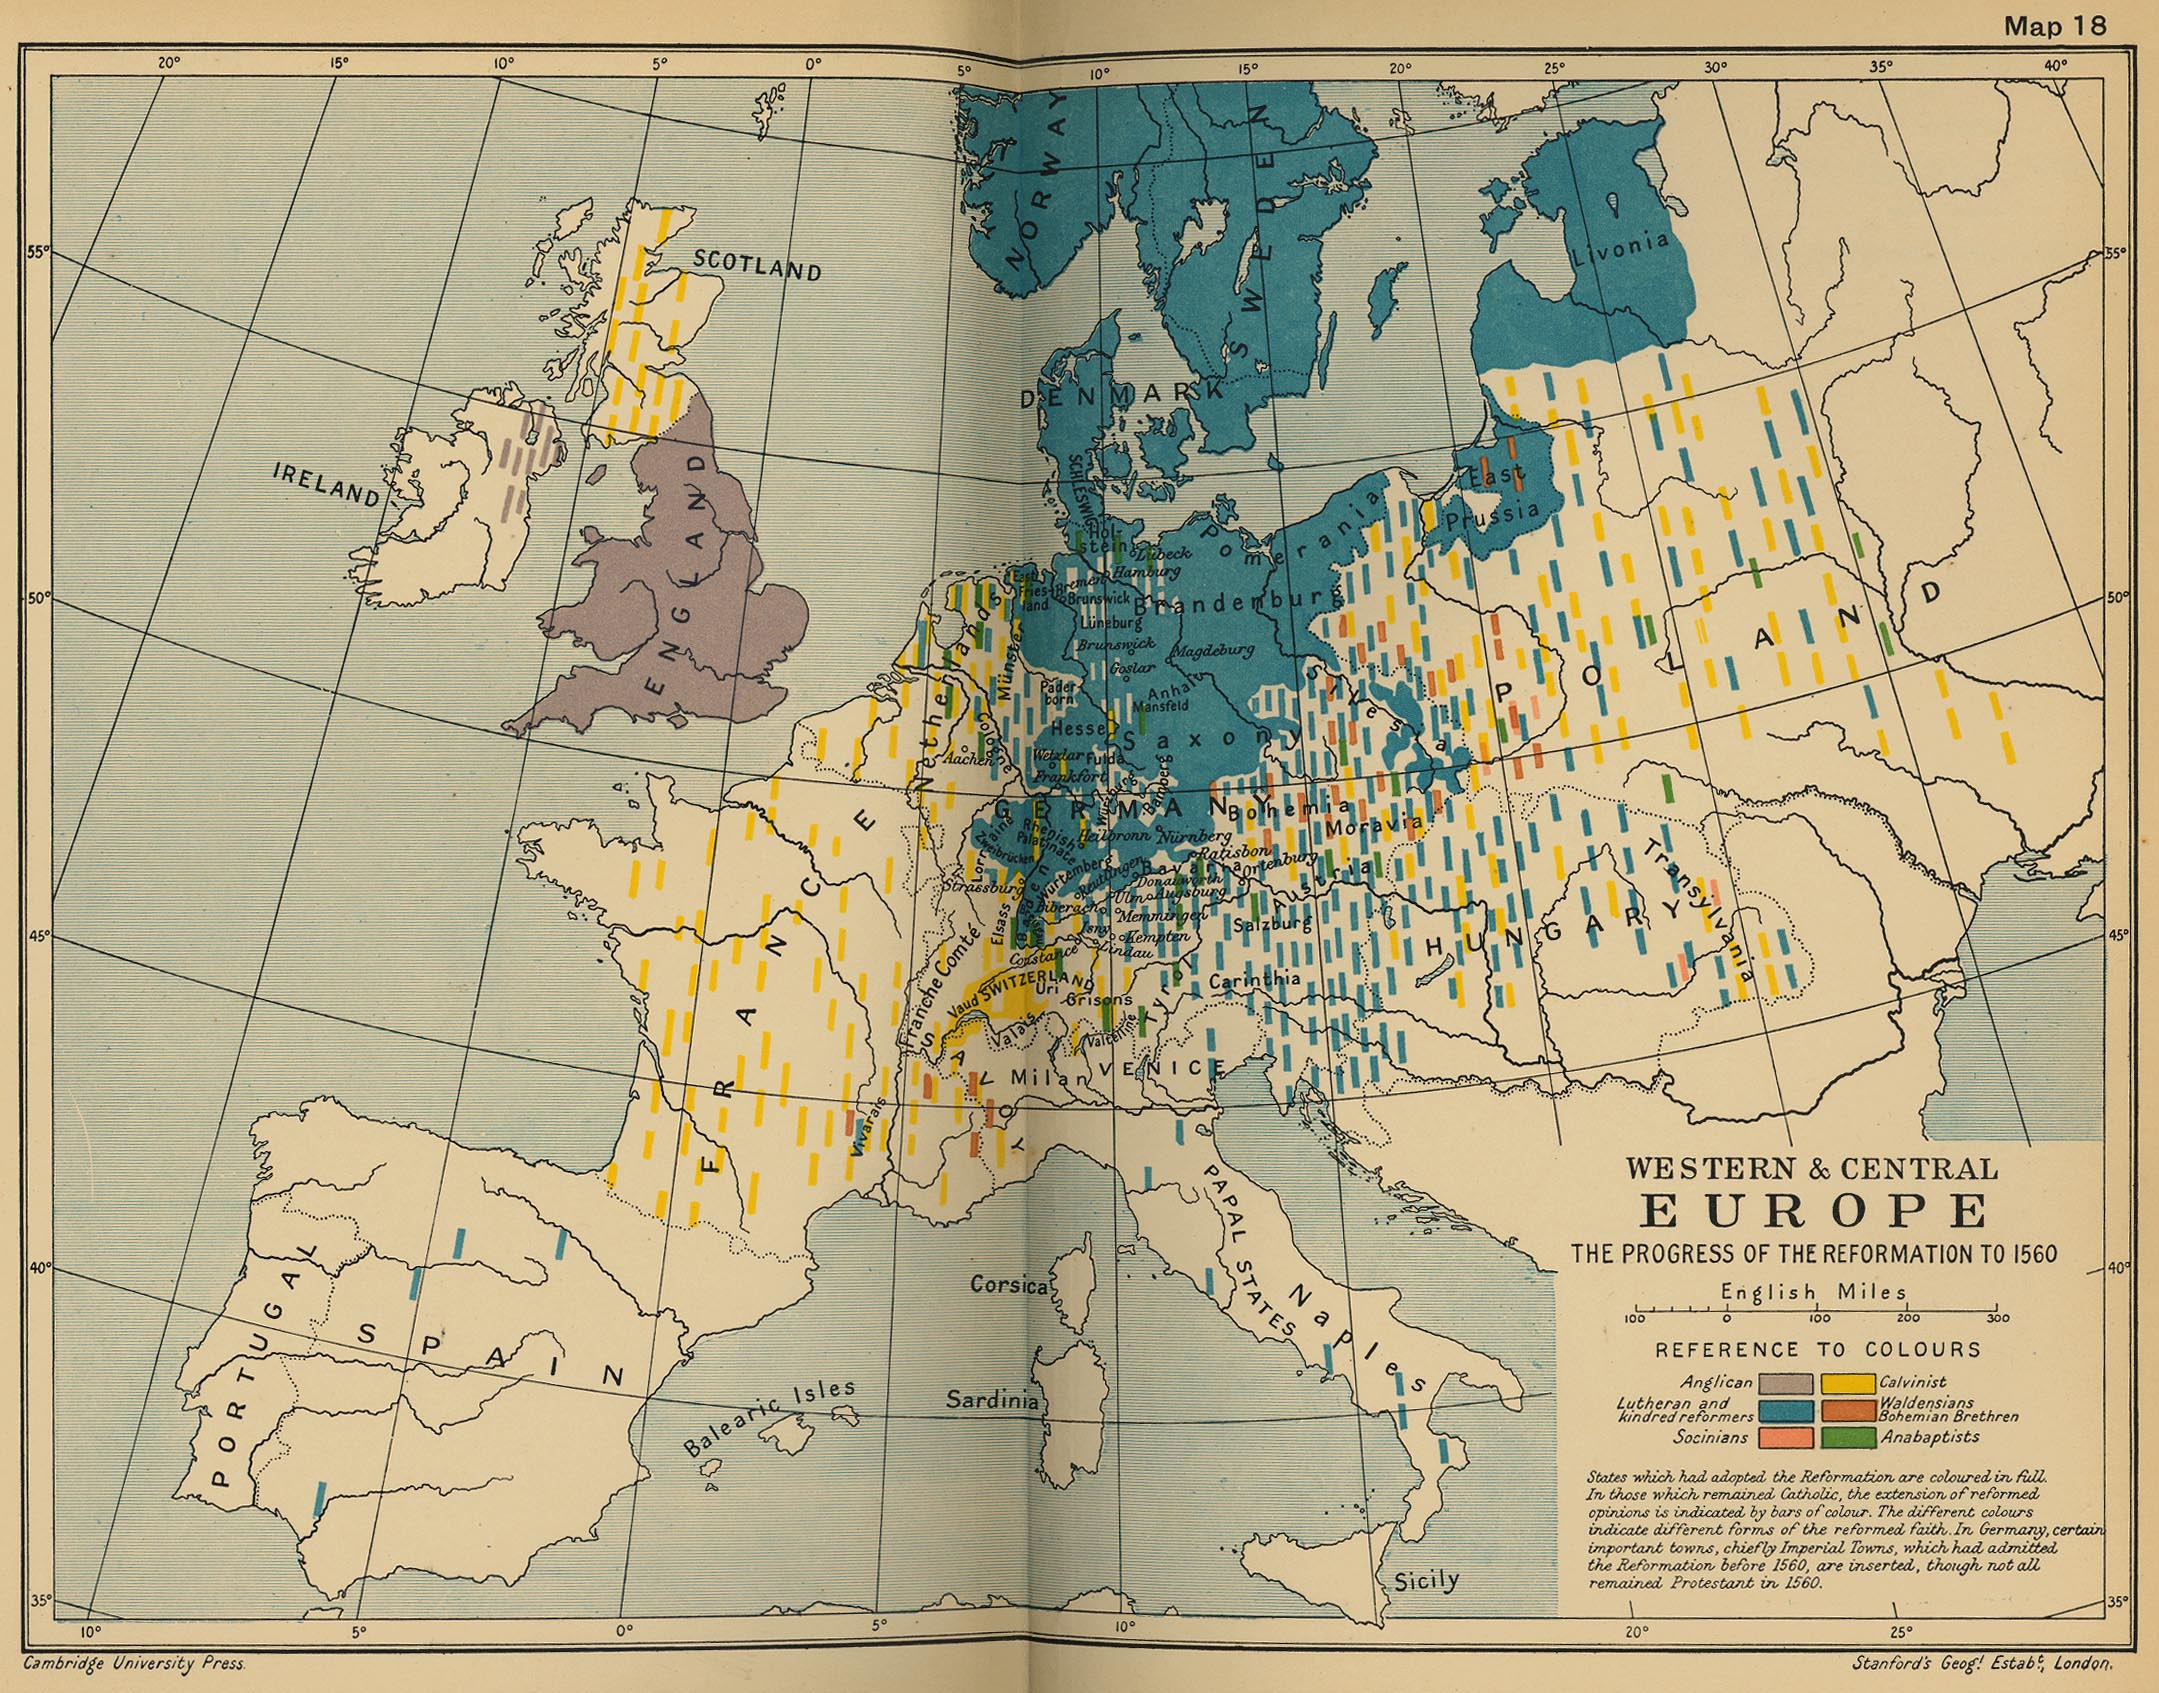 Map of Western and Central Europe - The Progress of the Reformation of 1560